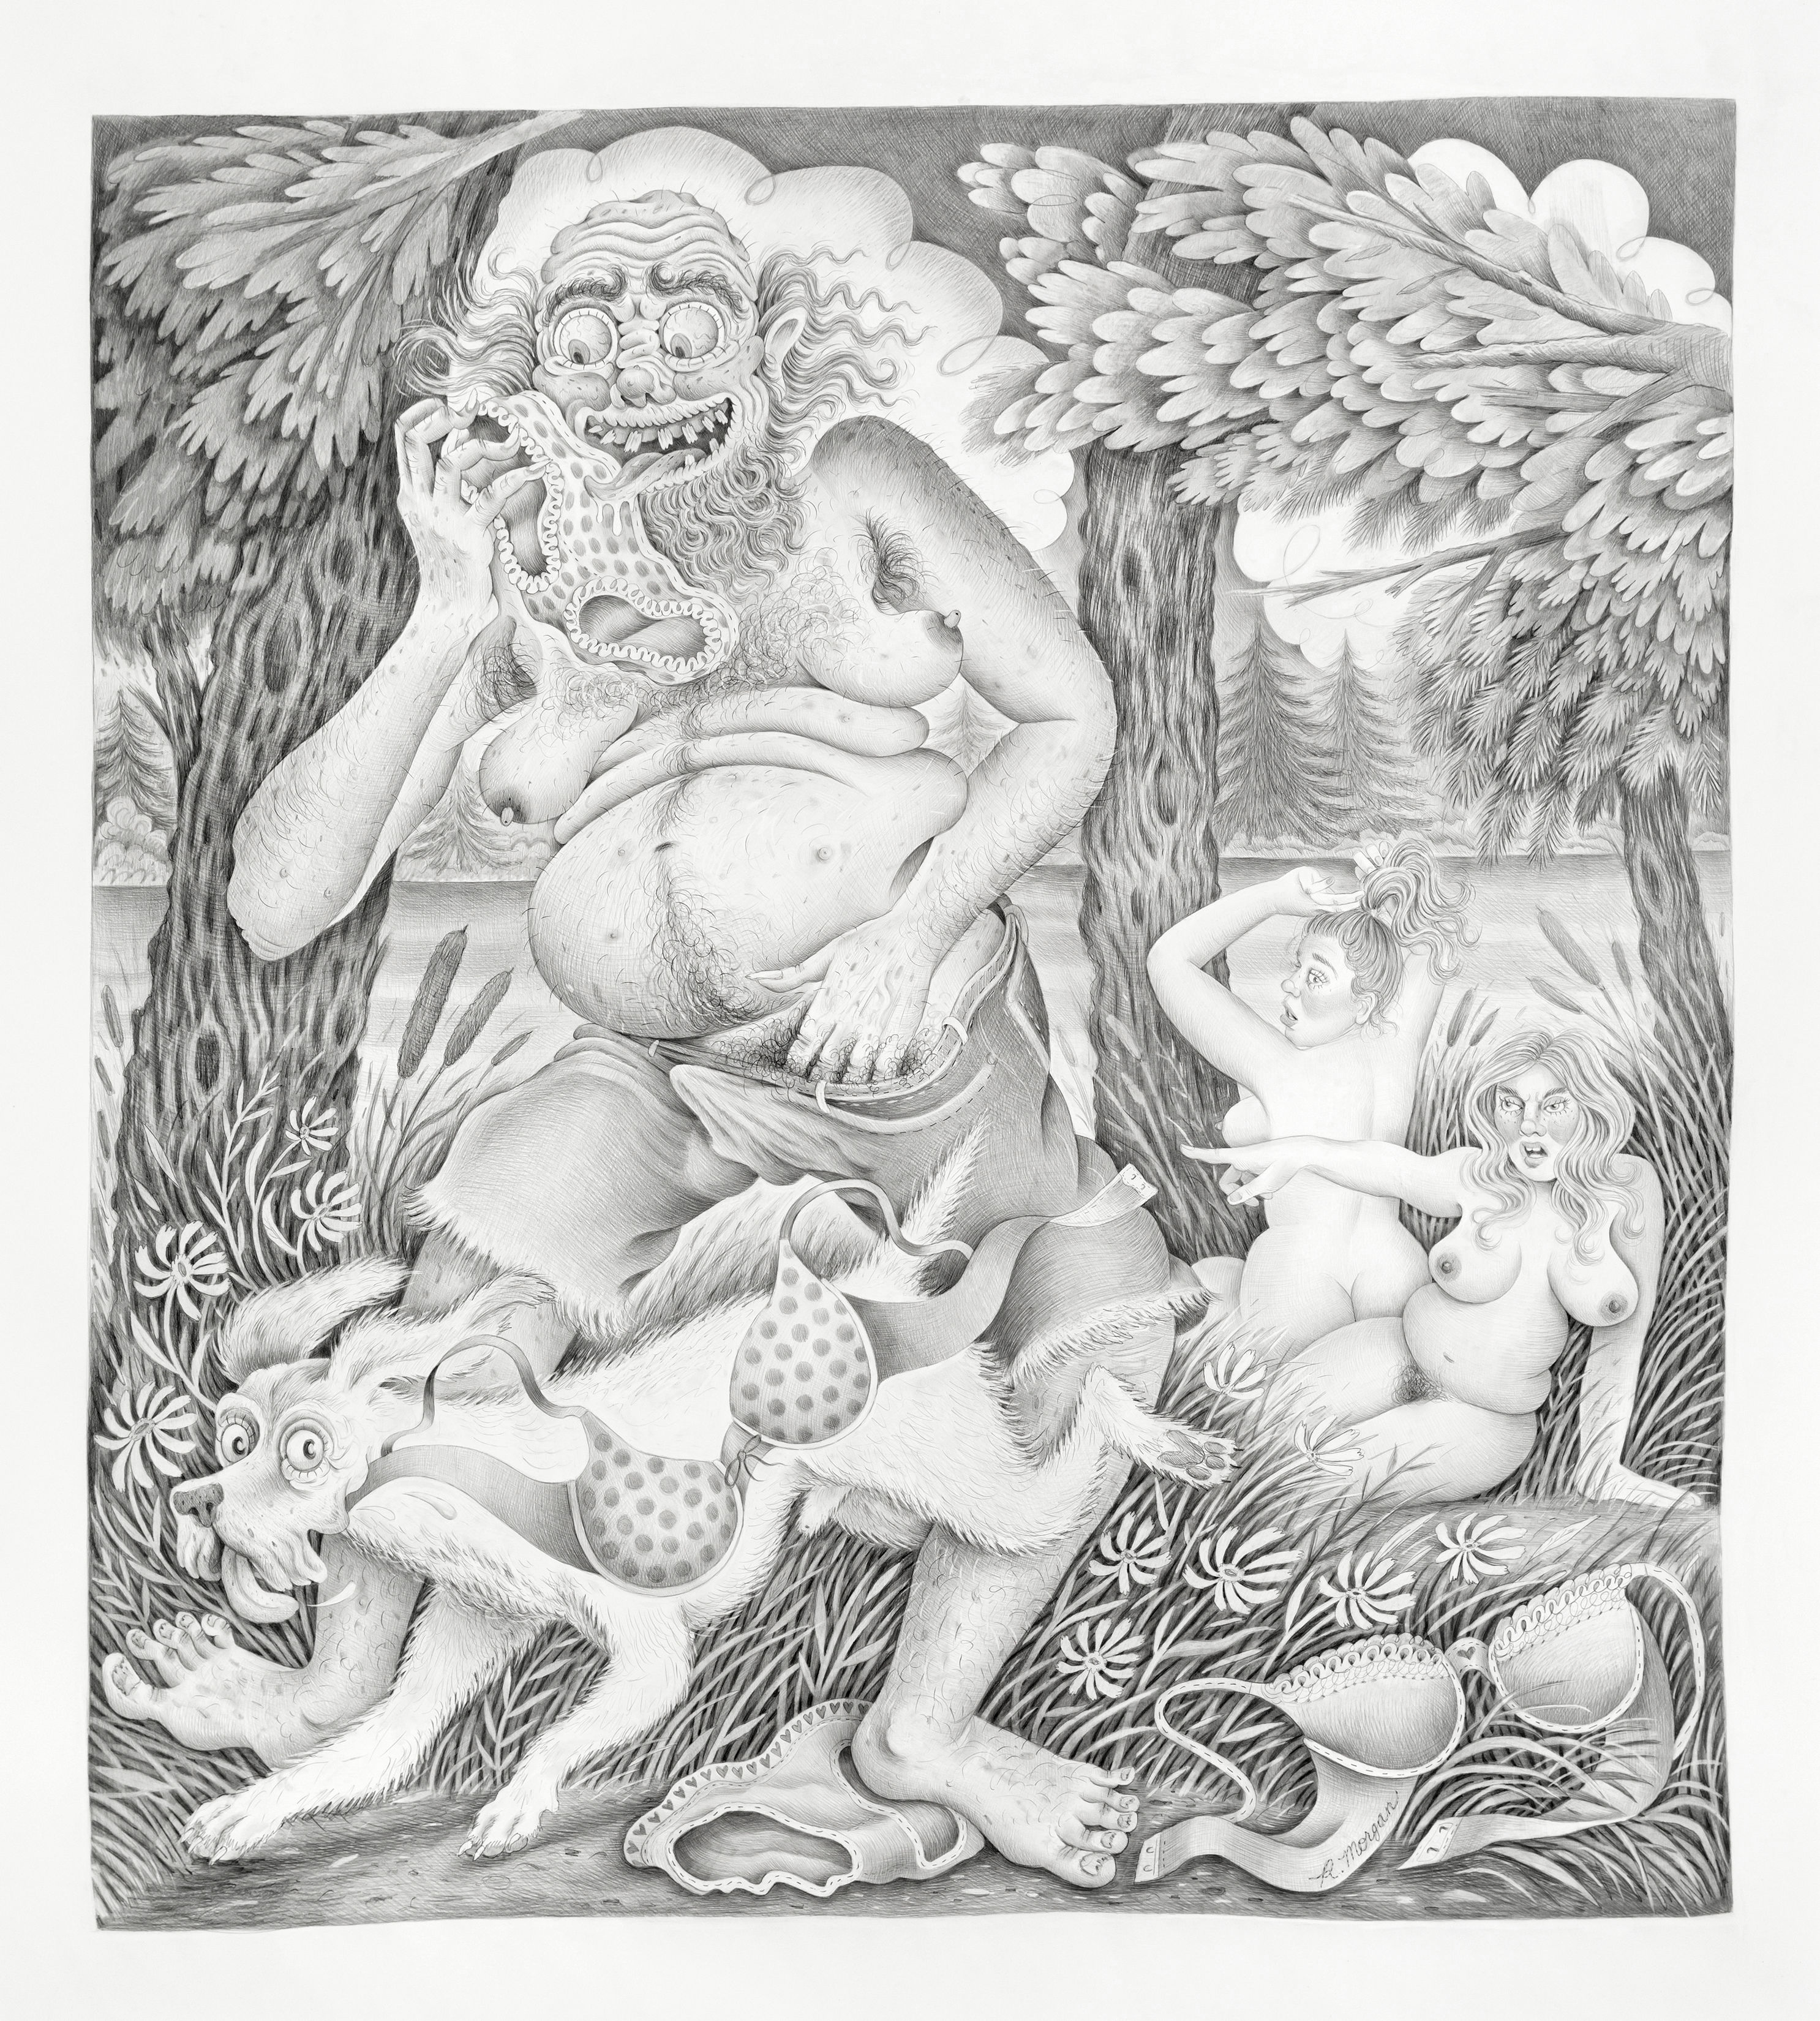 "Panty Stealers (After Diana and Actaeon)," 2019. Graphite on paper. 71h x 64w inches.